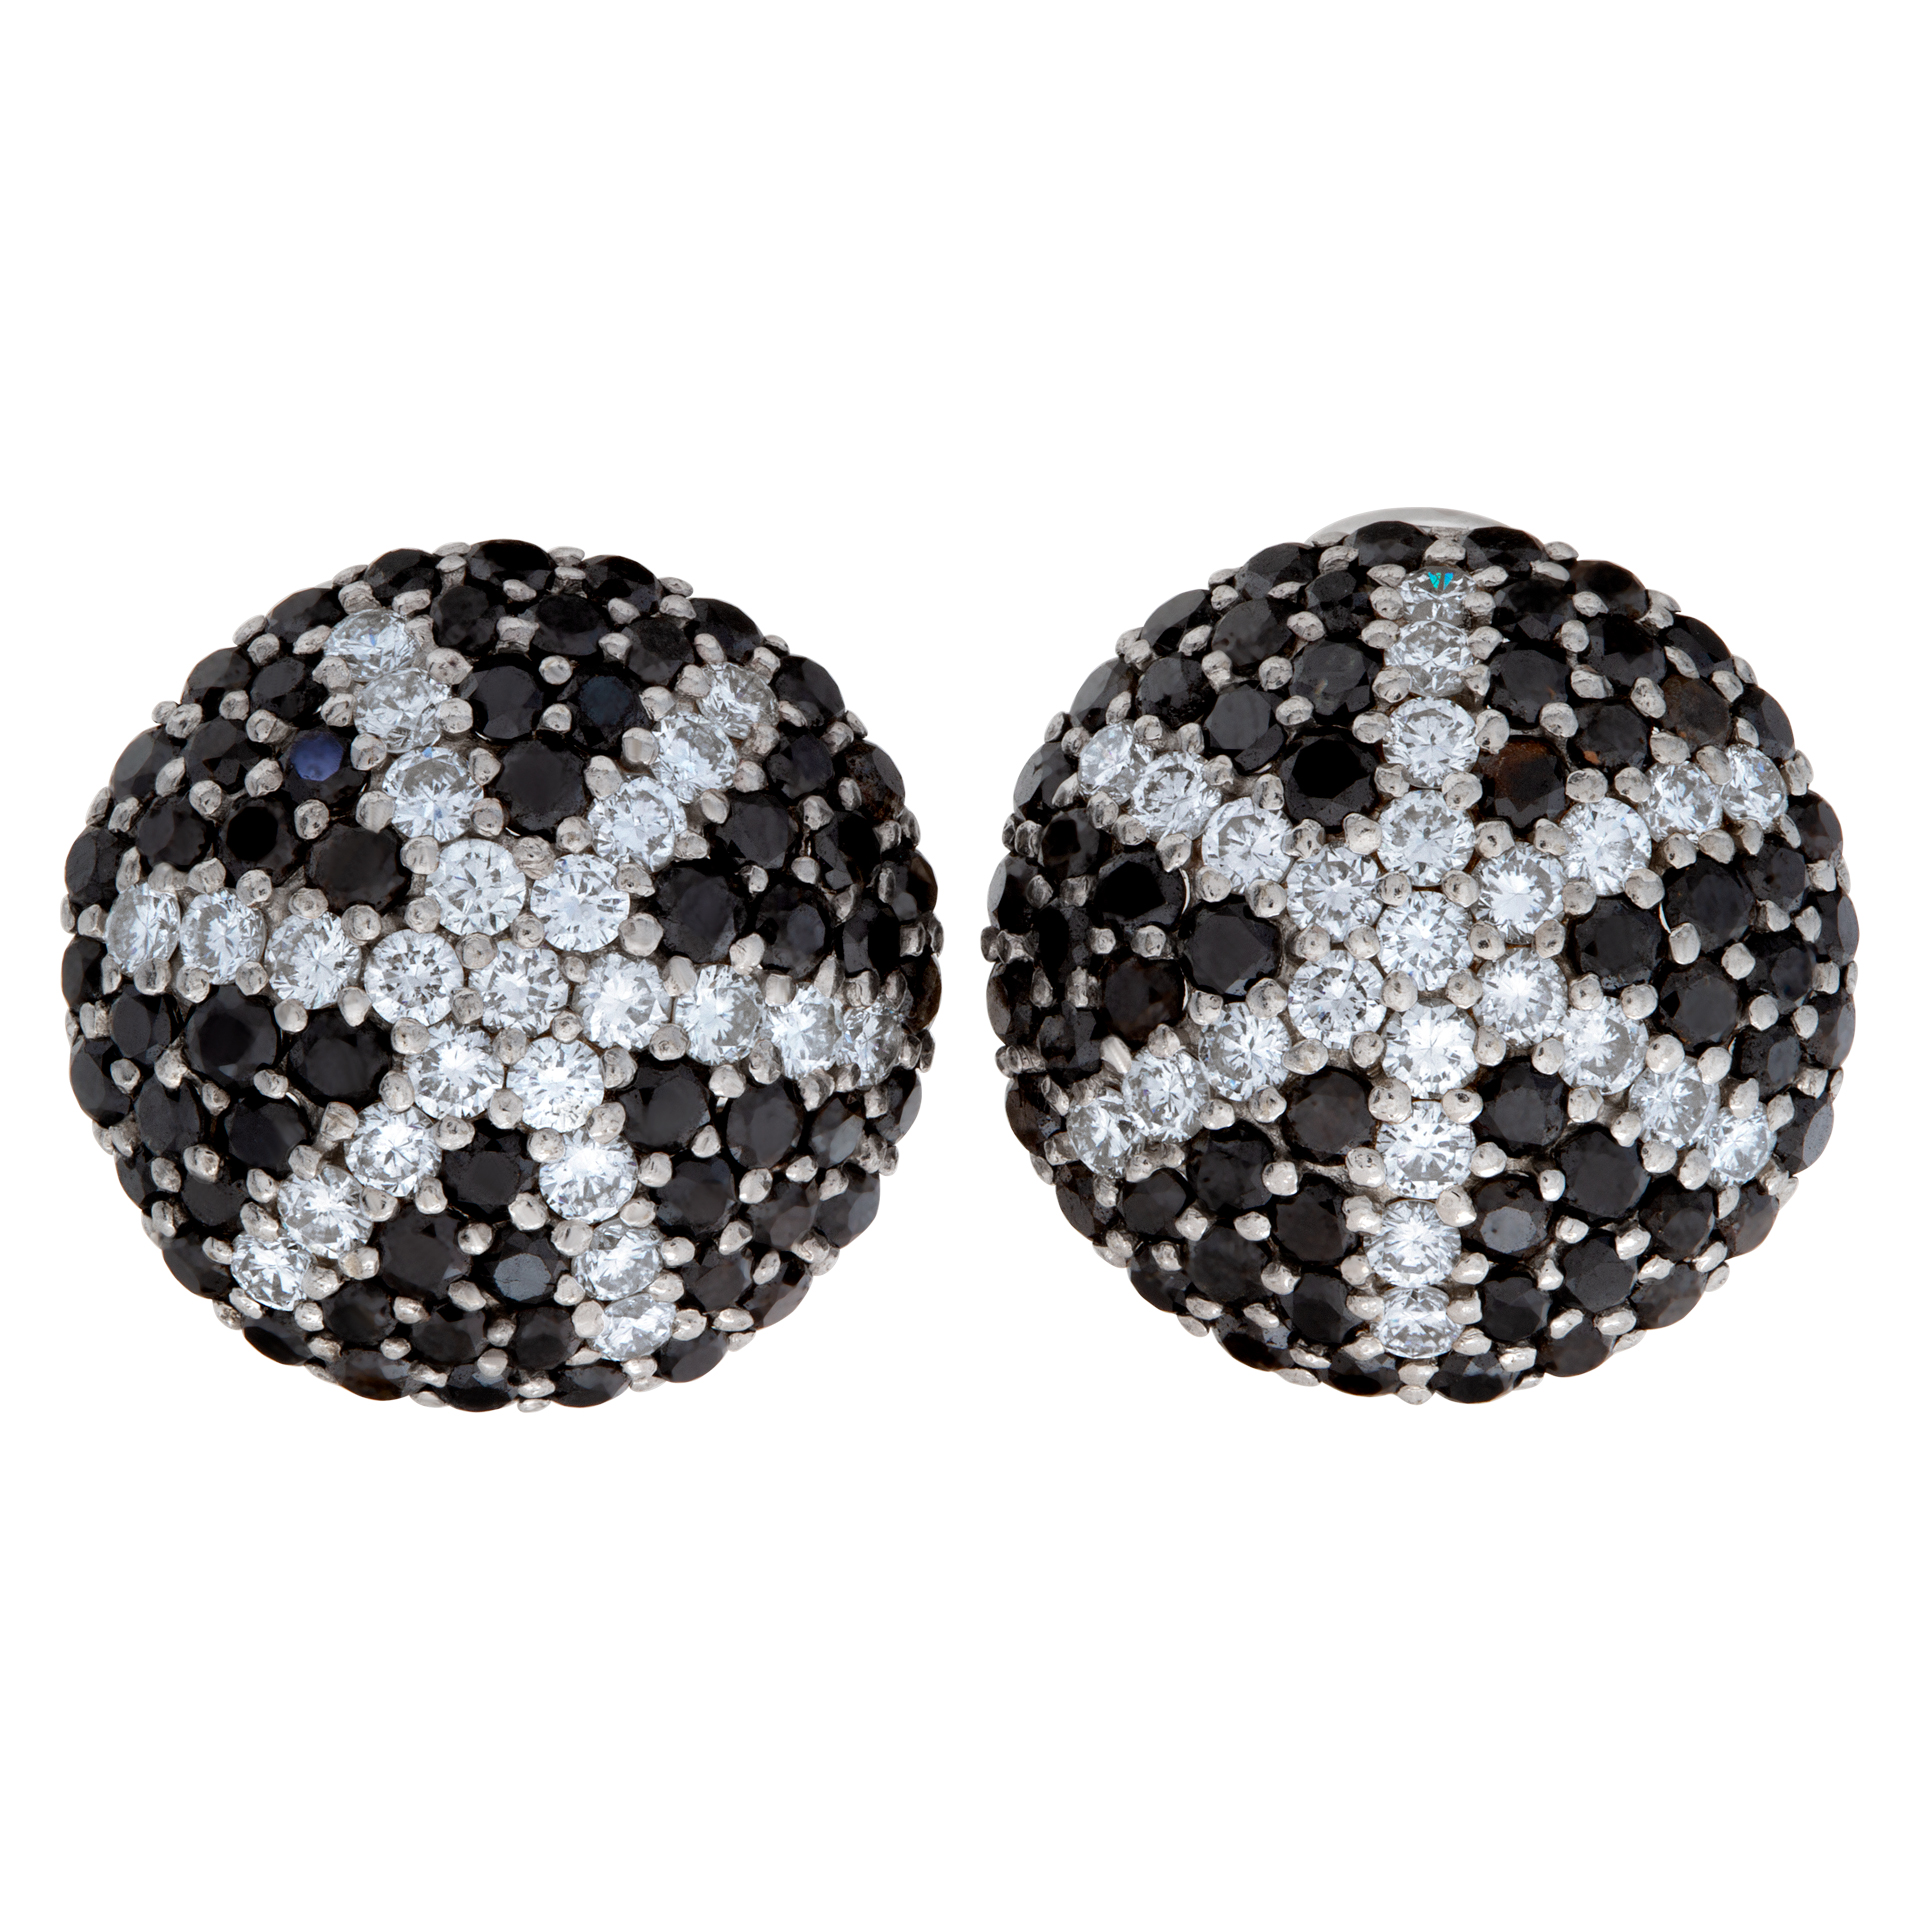 Diamond and black hematite earrings with approximately 1.25 carat in white diamond set 18k white gold image 1